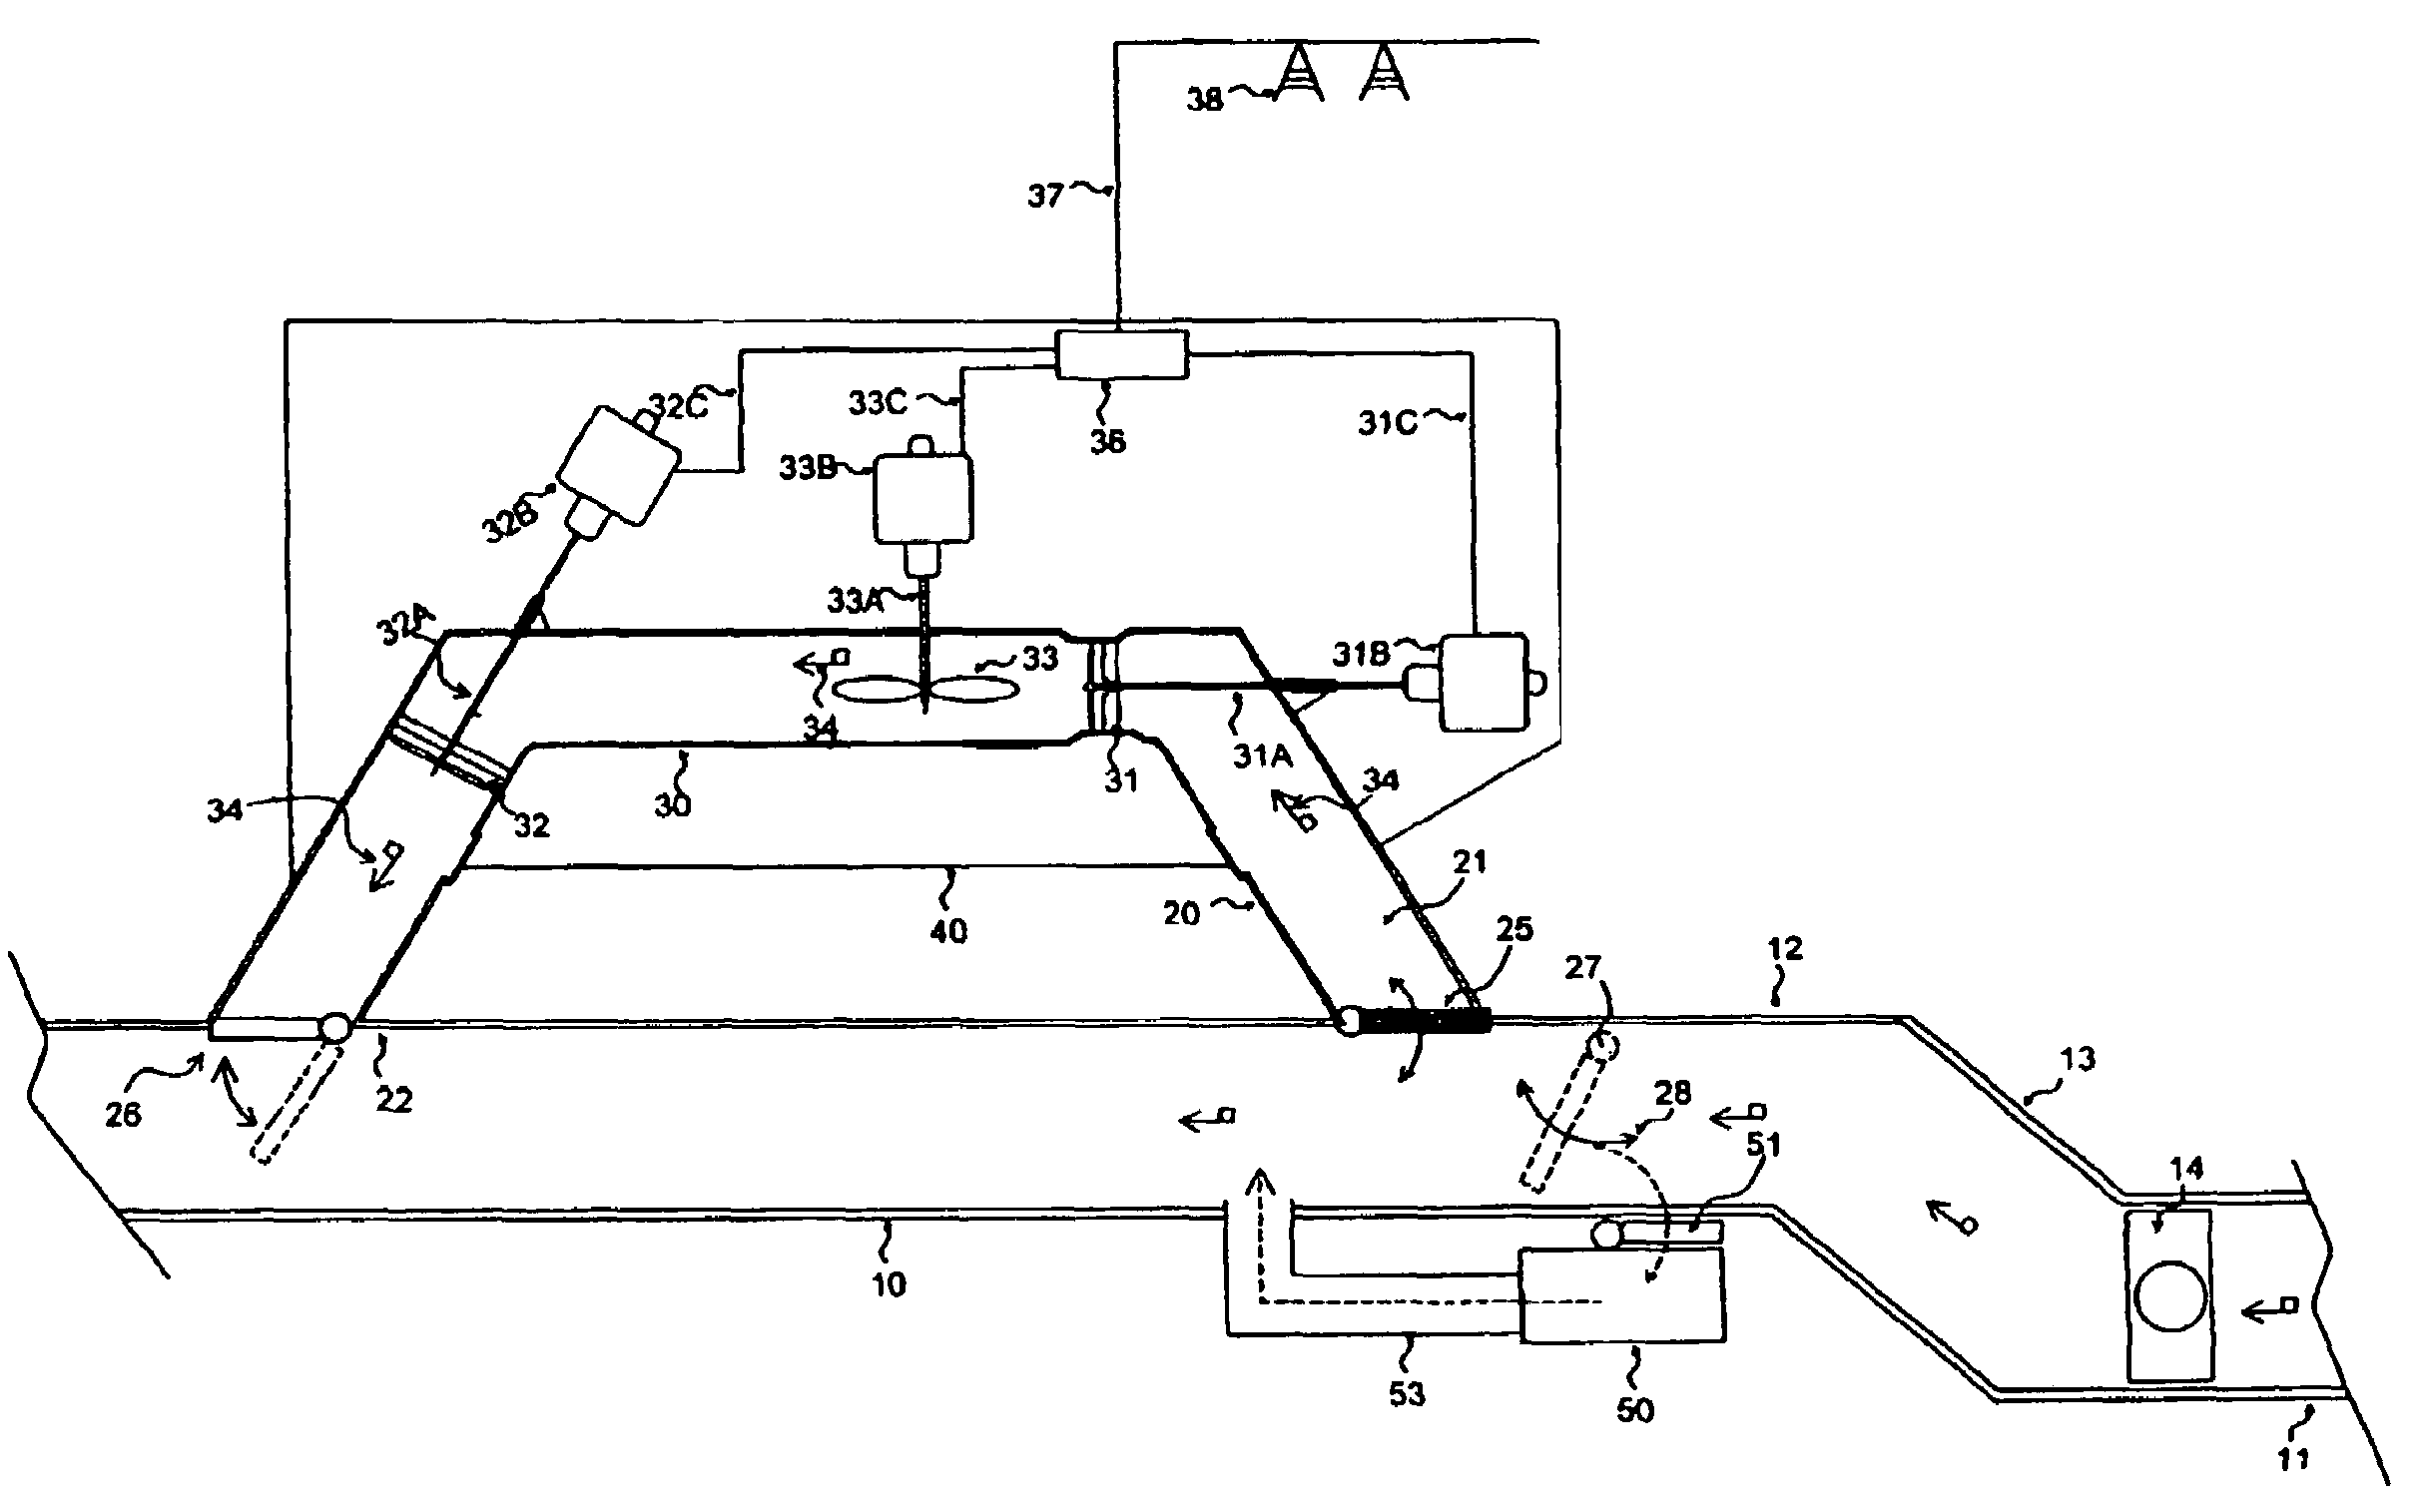 Waste water electrical power generating system with storage system and methods for use therewith